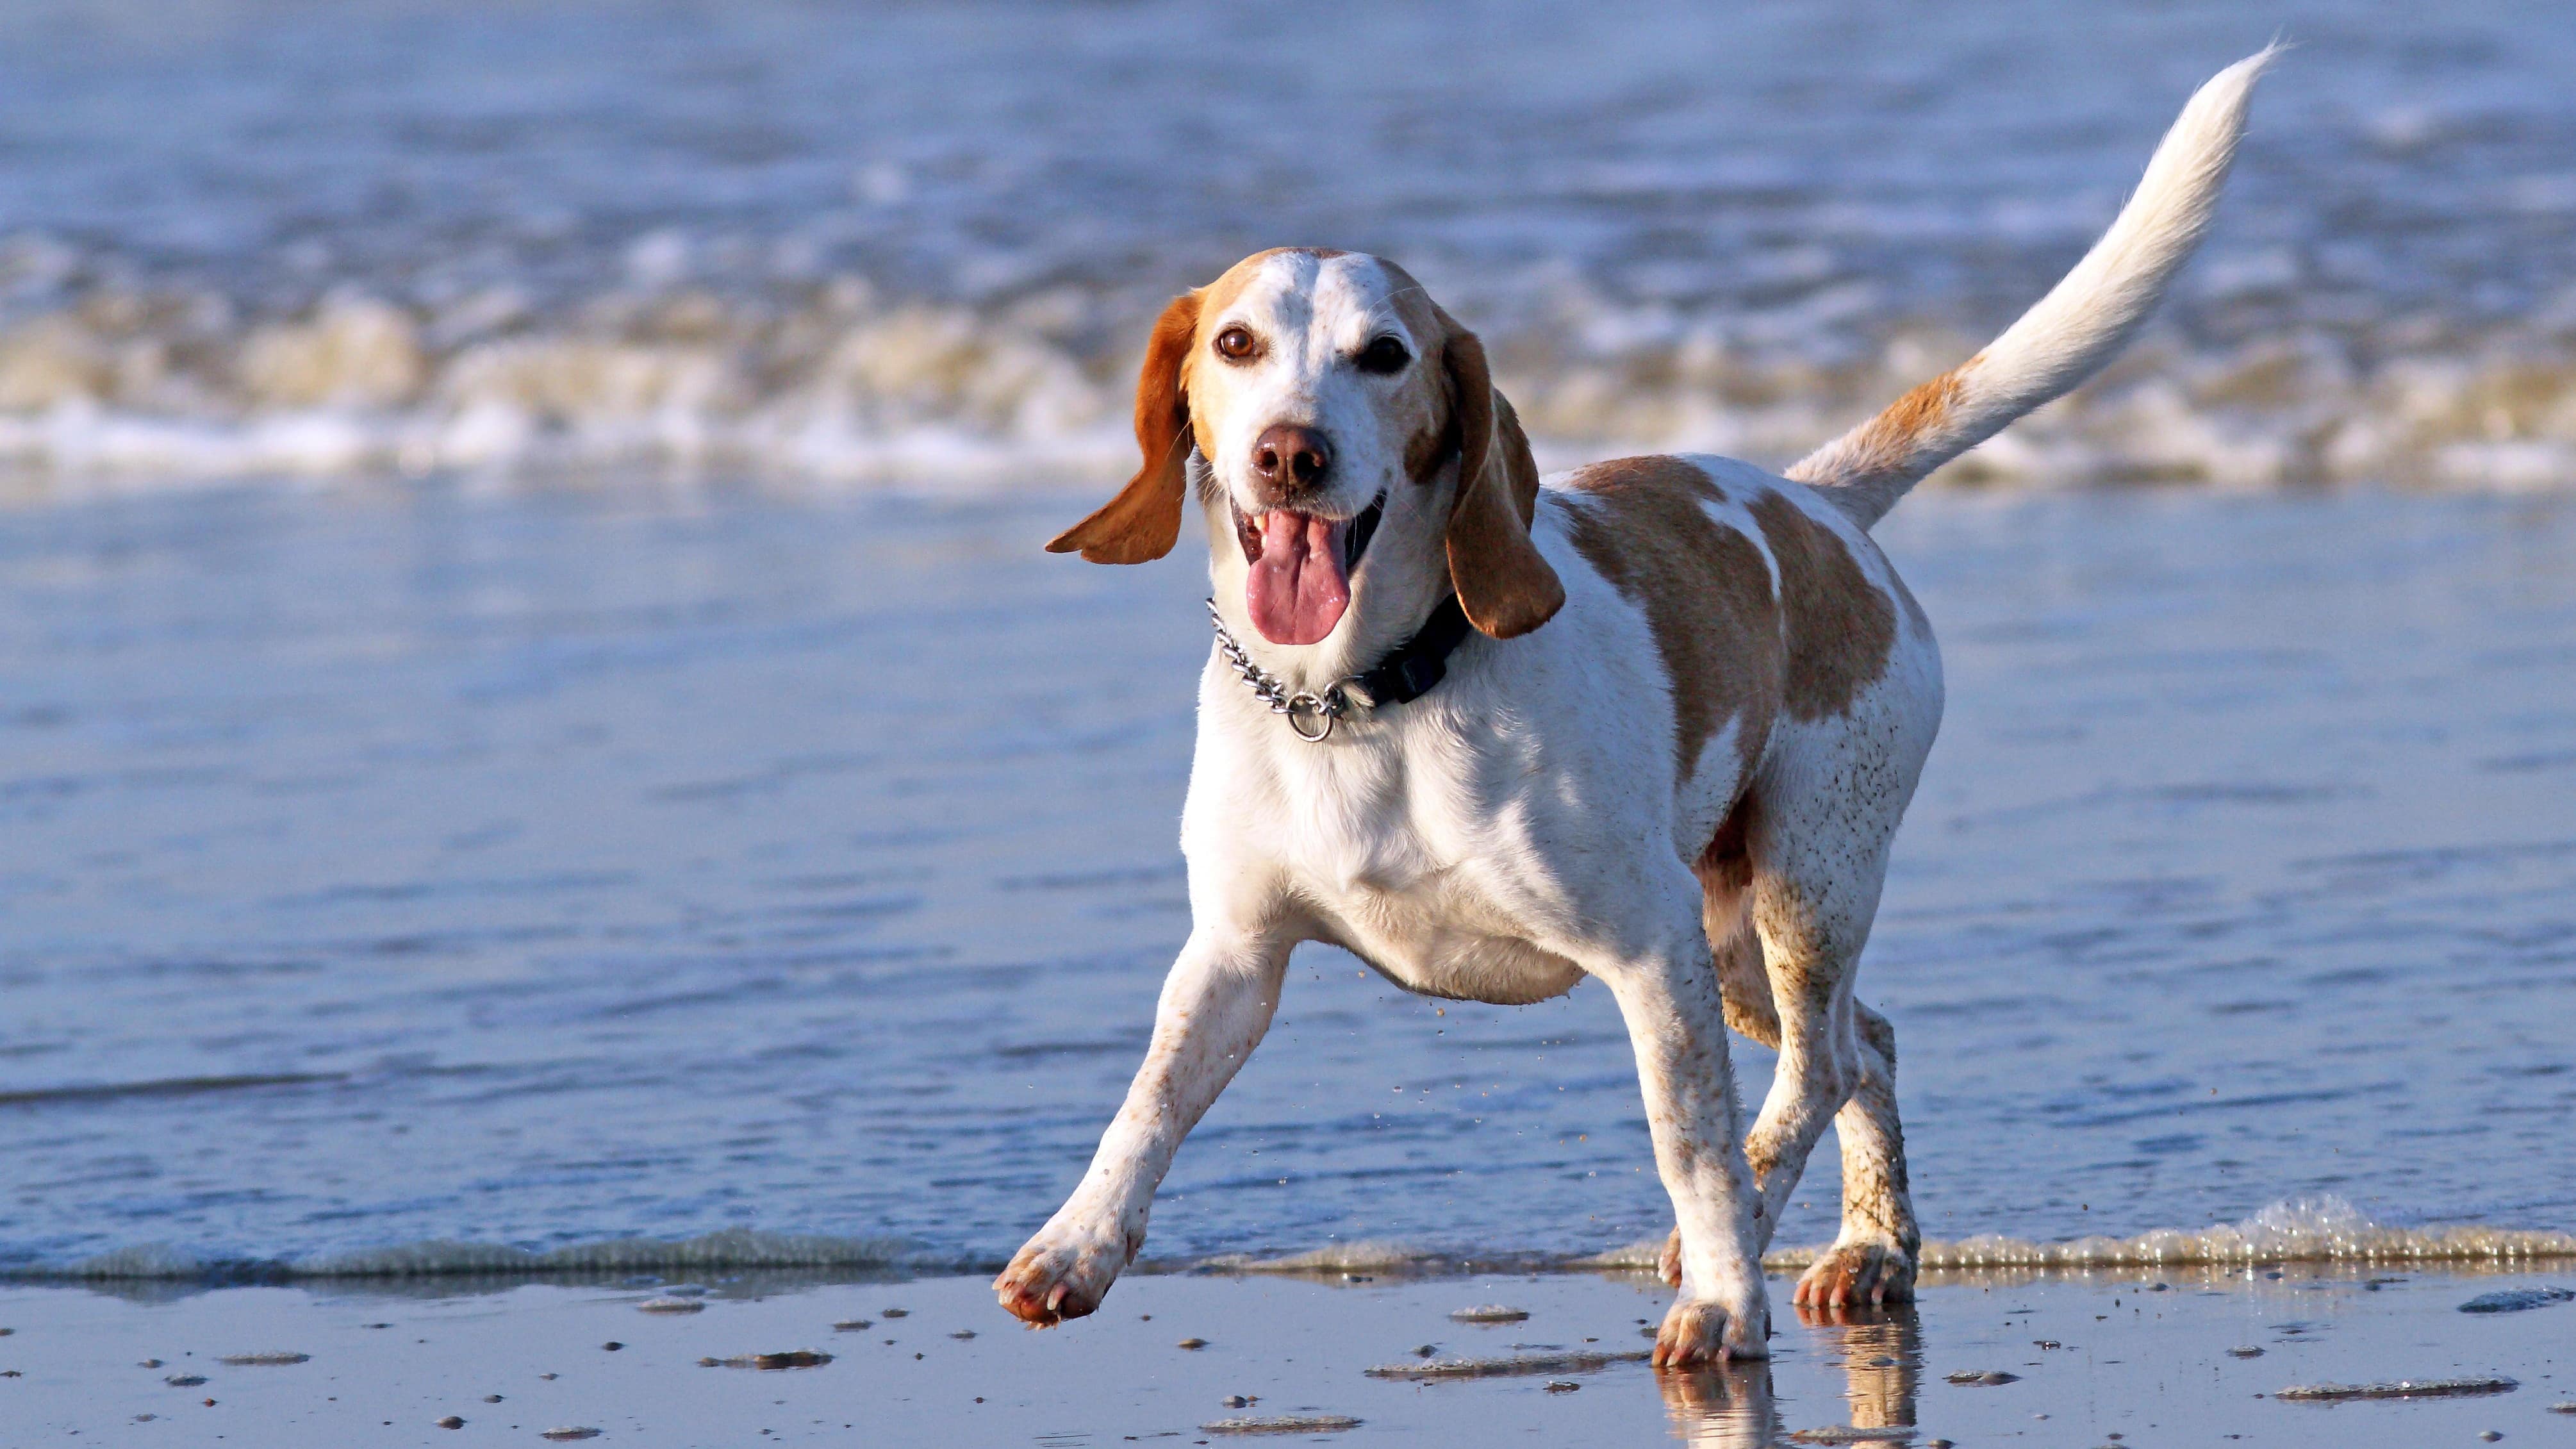 Vacation destinations in the USA with dog-friendly beaches